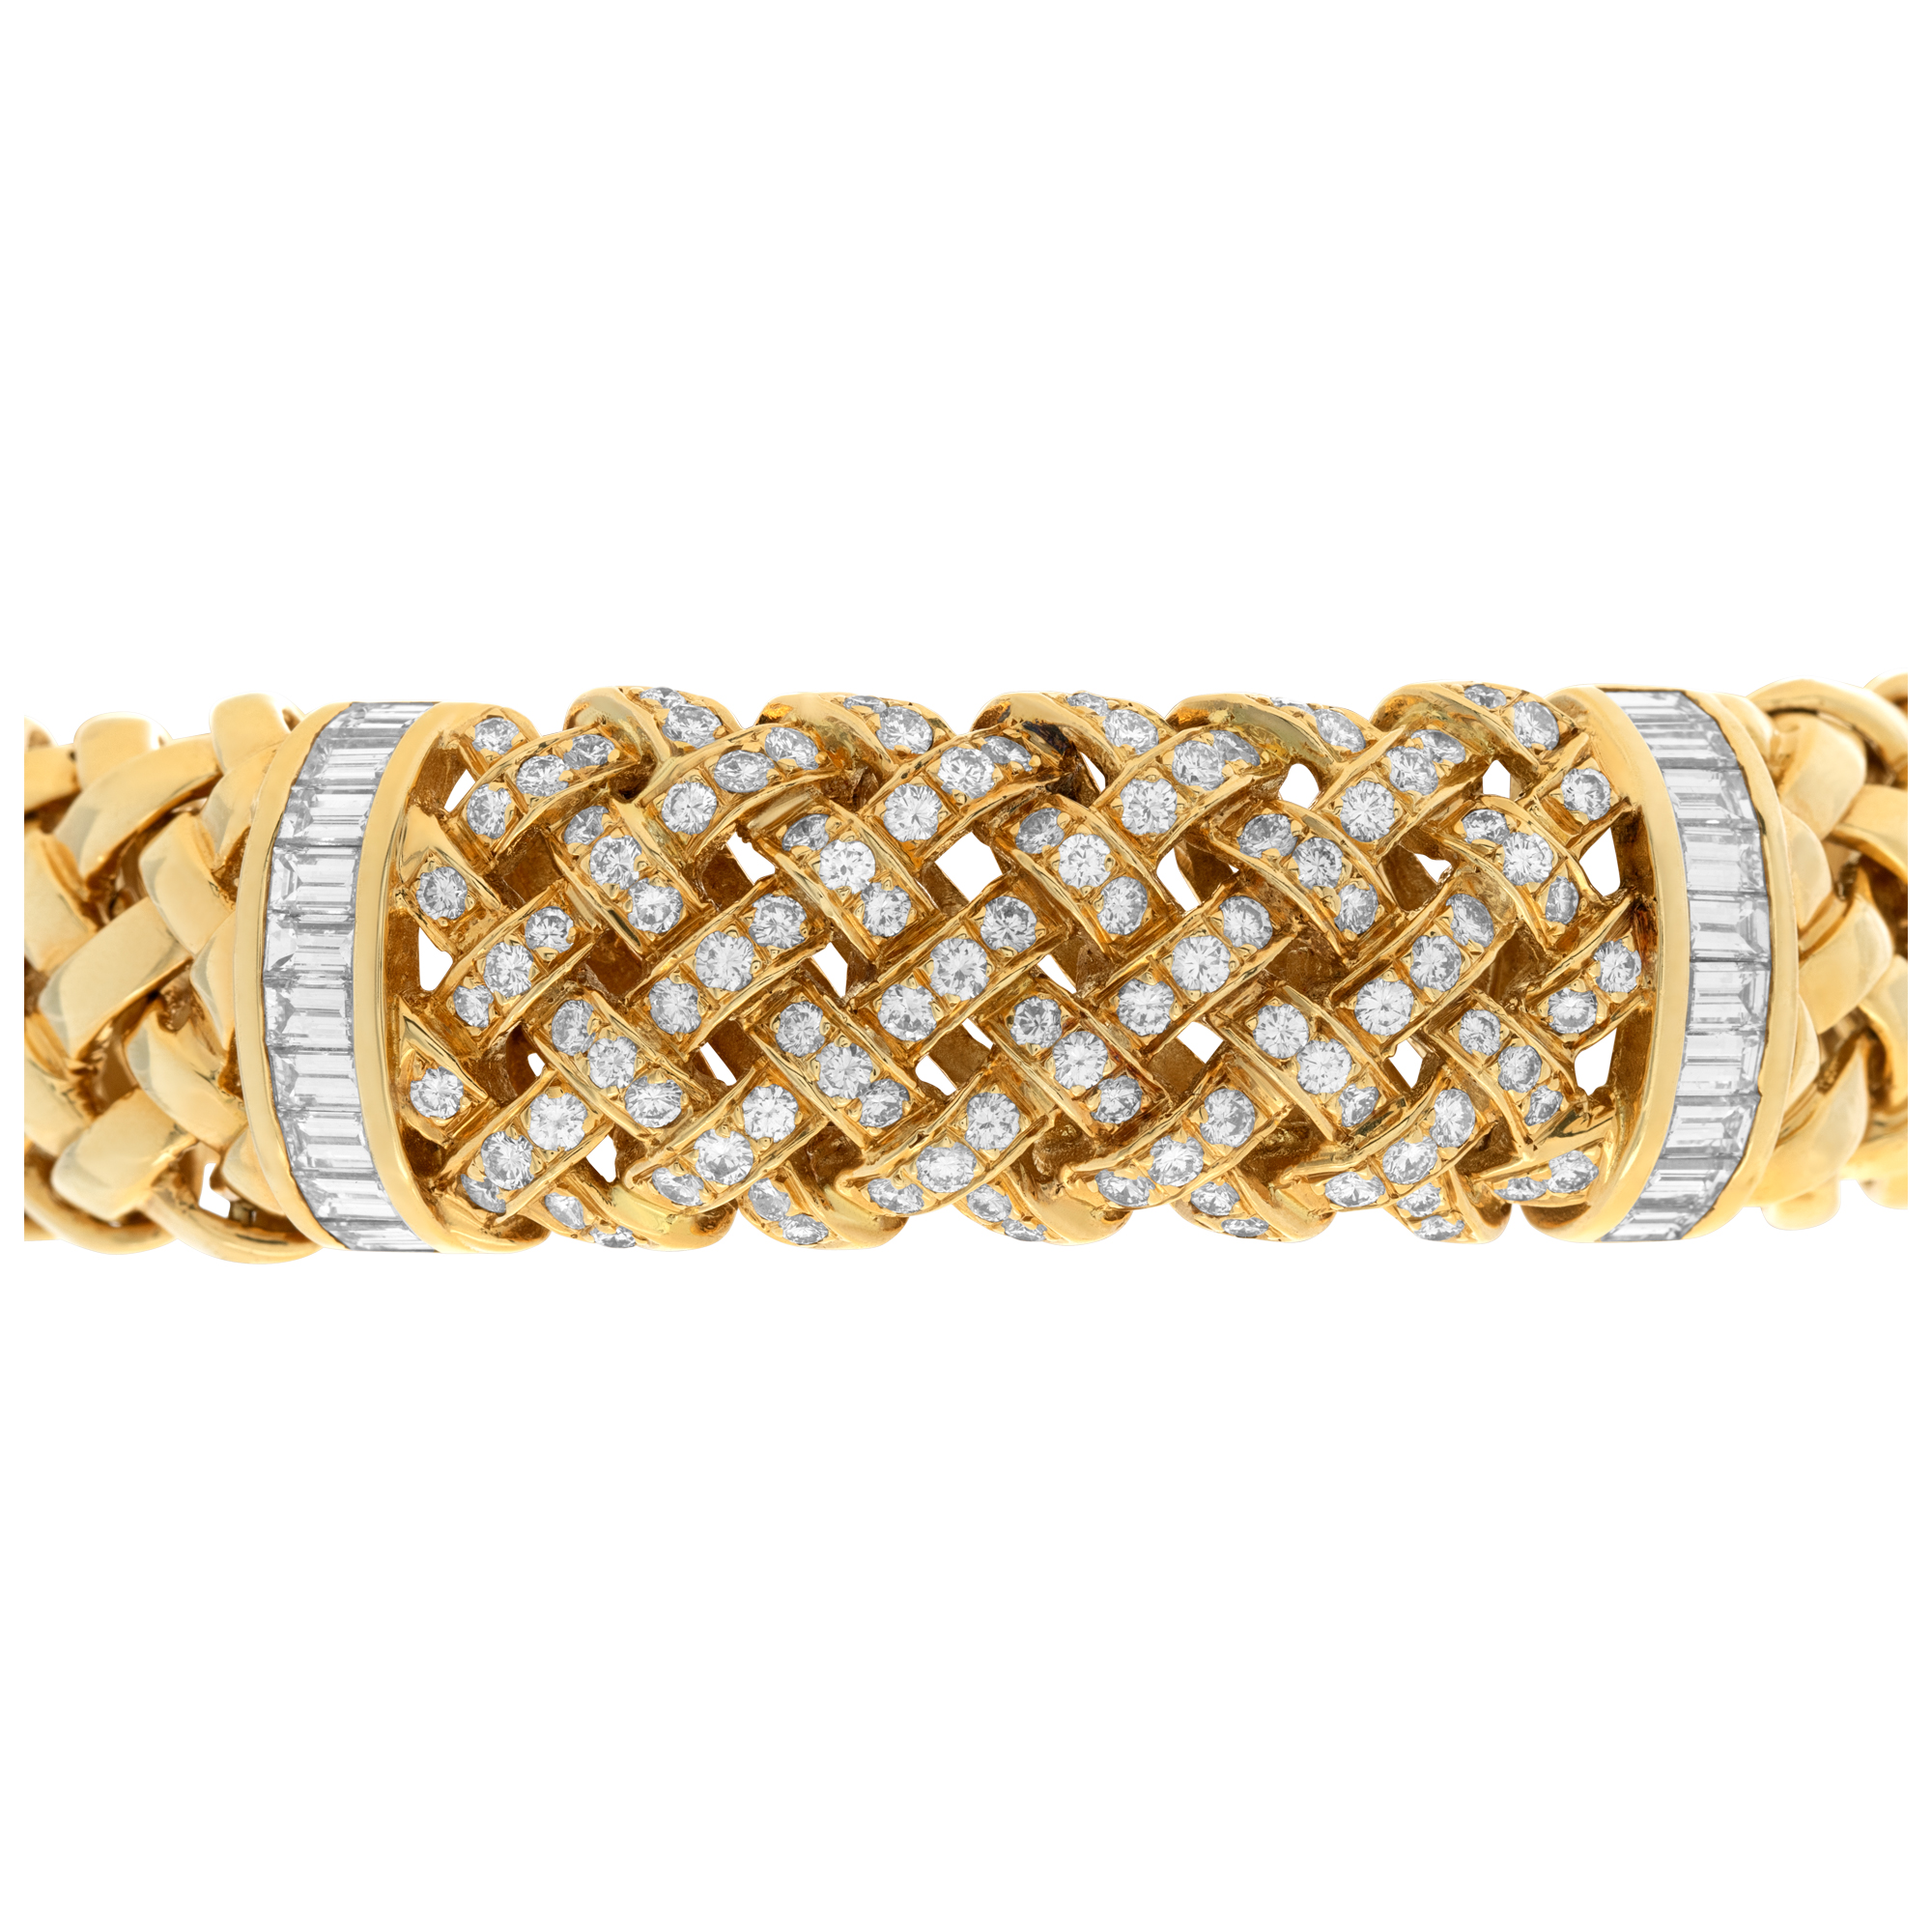 Tiffany & Co. VANNERIE Collection bracelet in 18K yellow gold image 2